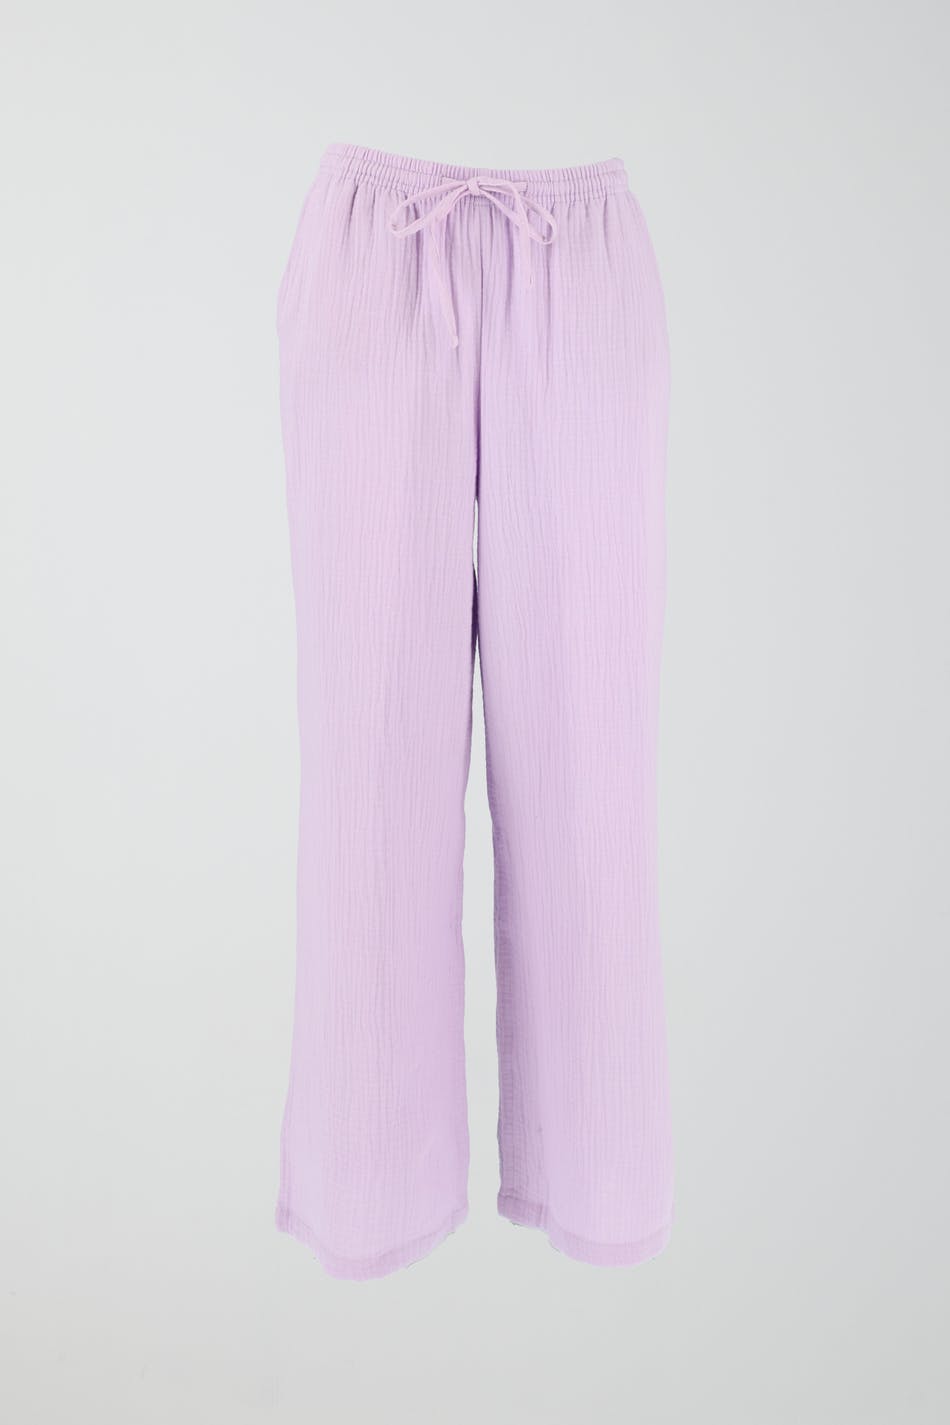 Gina Tricot Wide leg Pants in Light Green, White